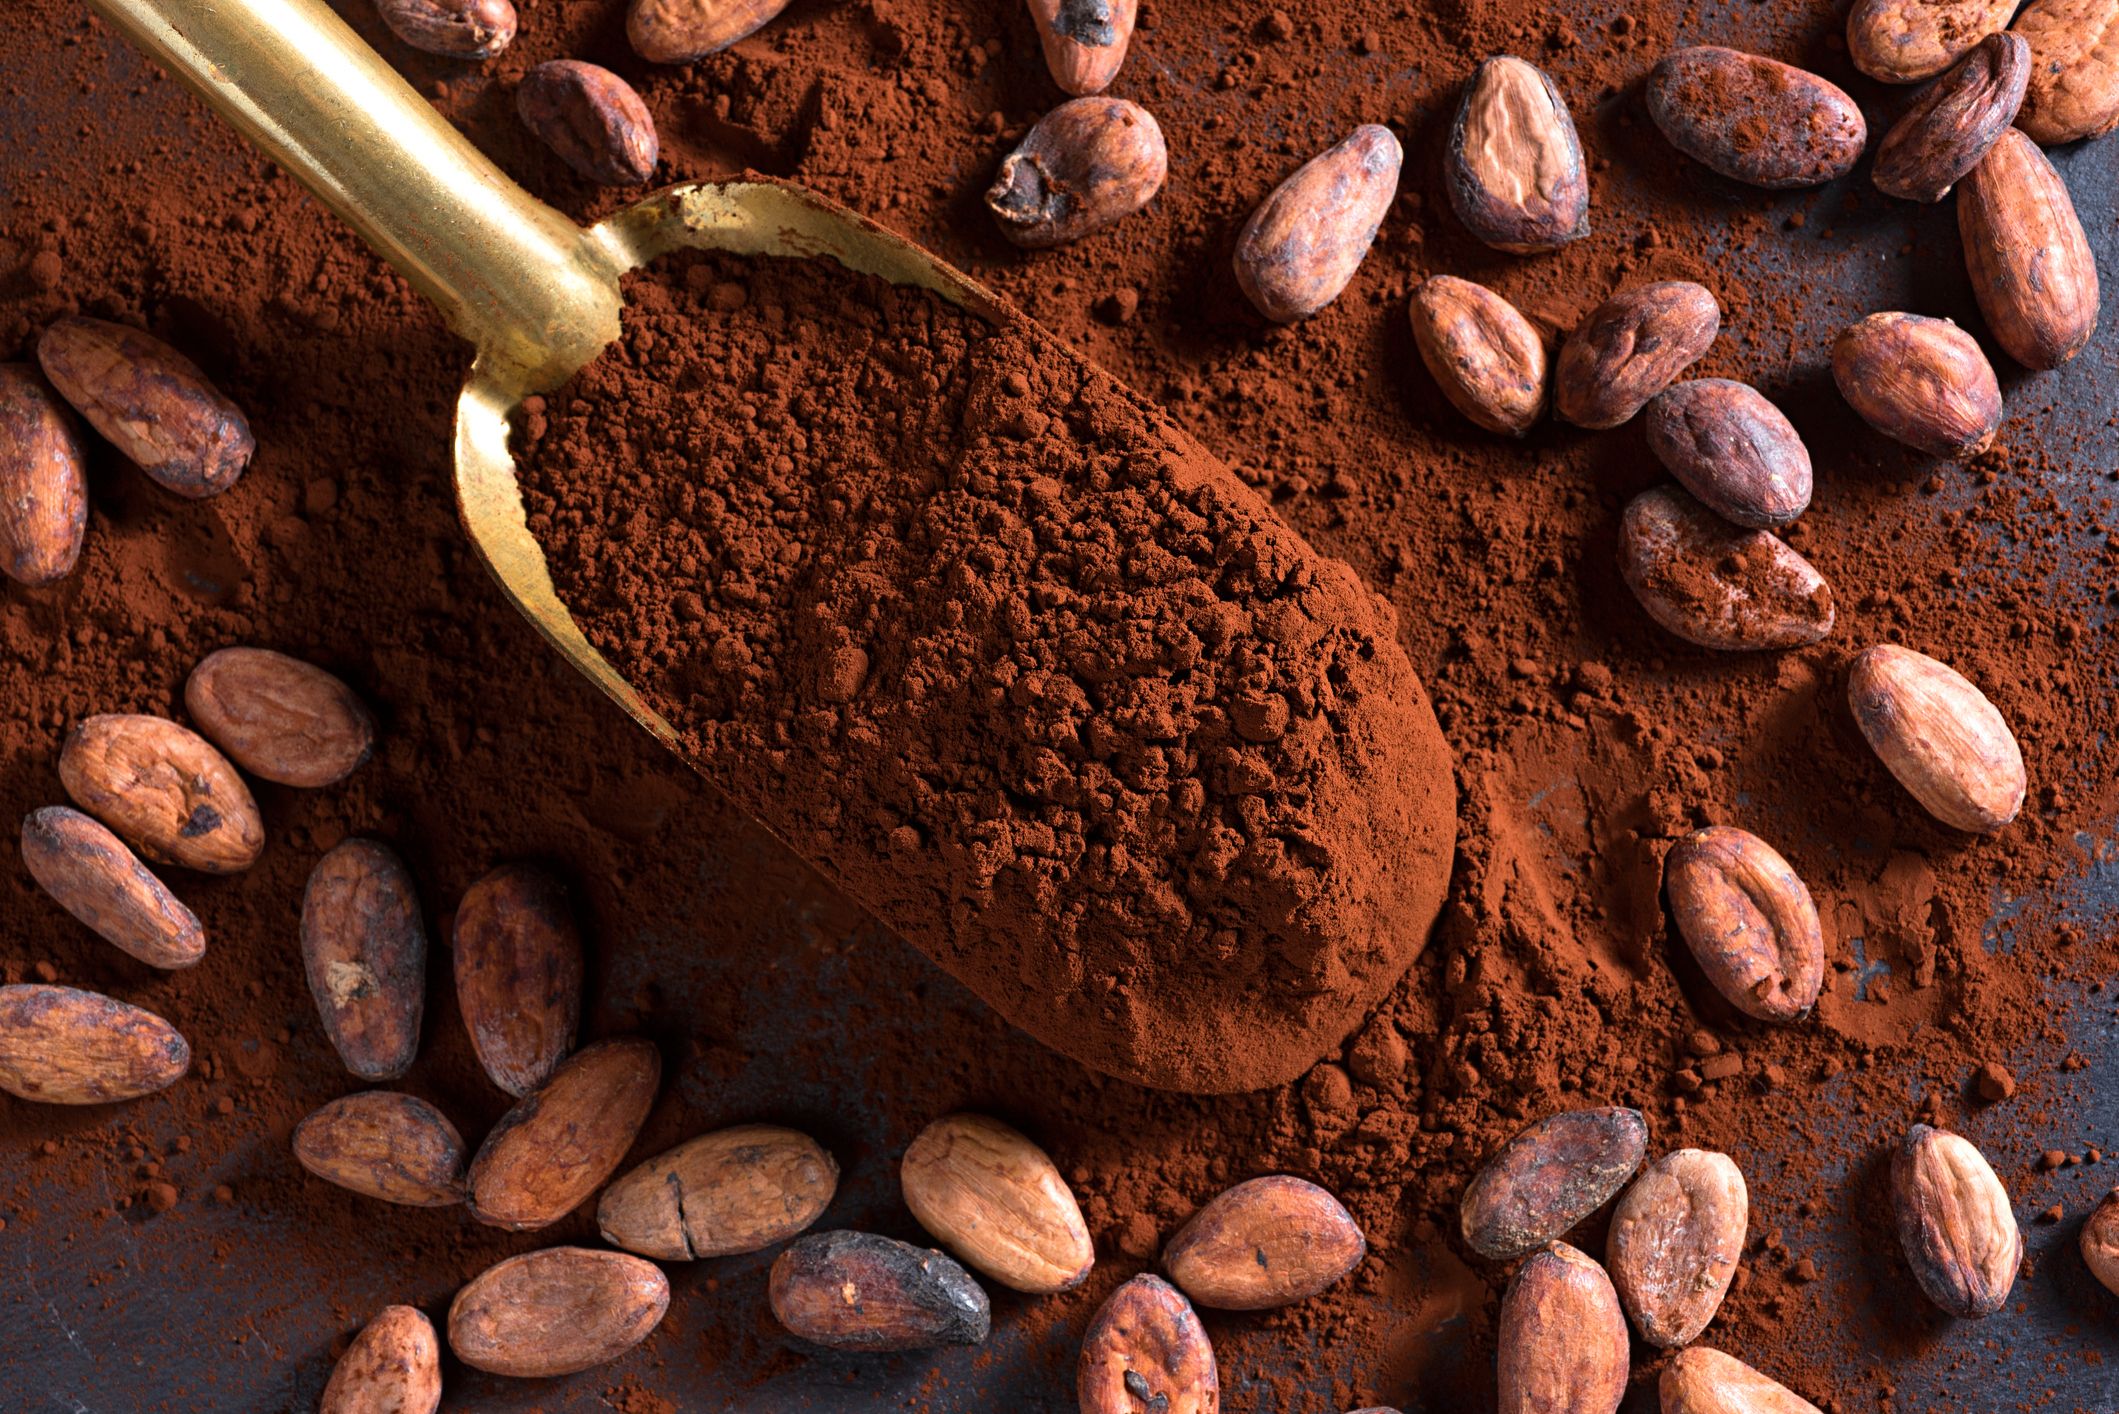 Are You Making These cocoa beans Mistakes?